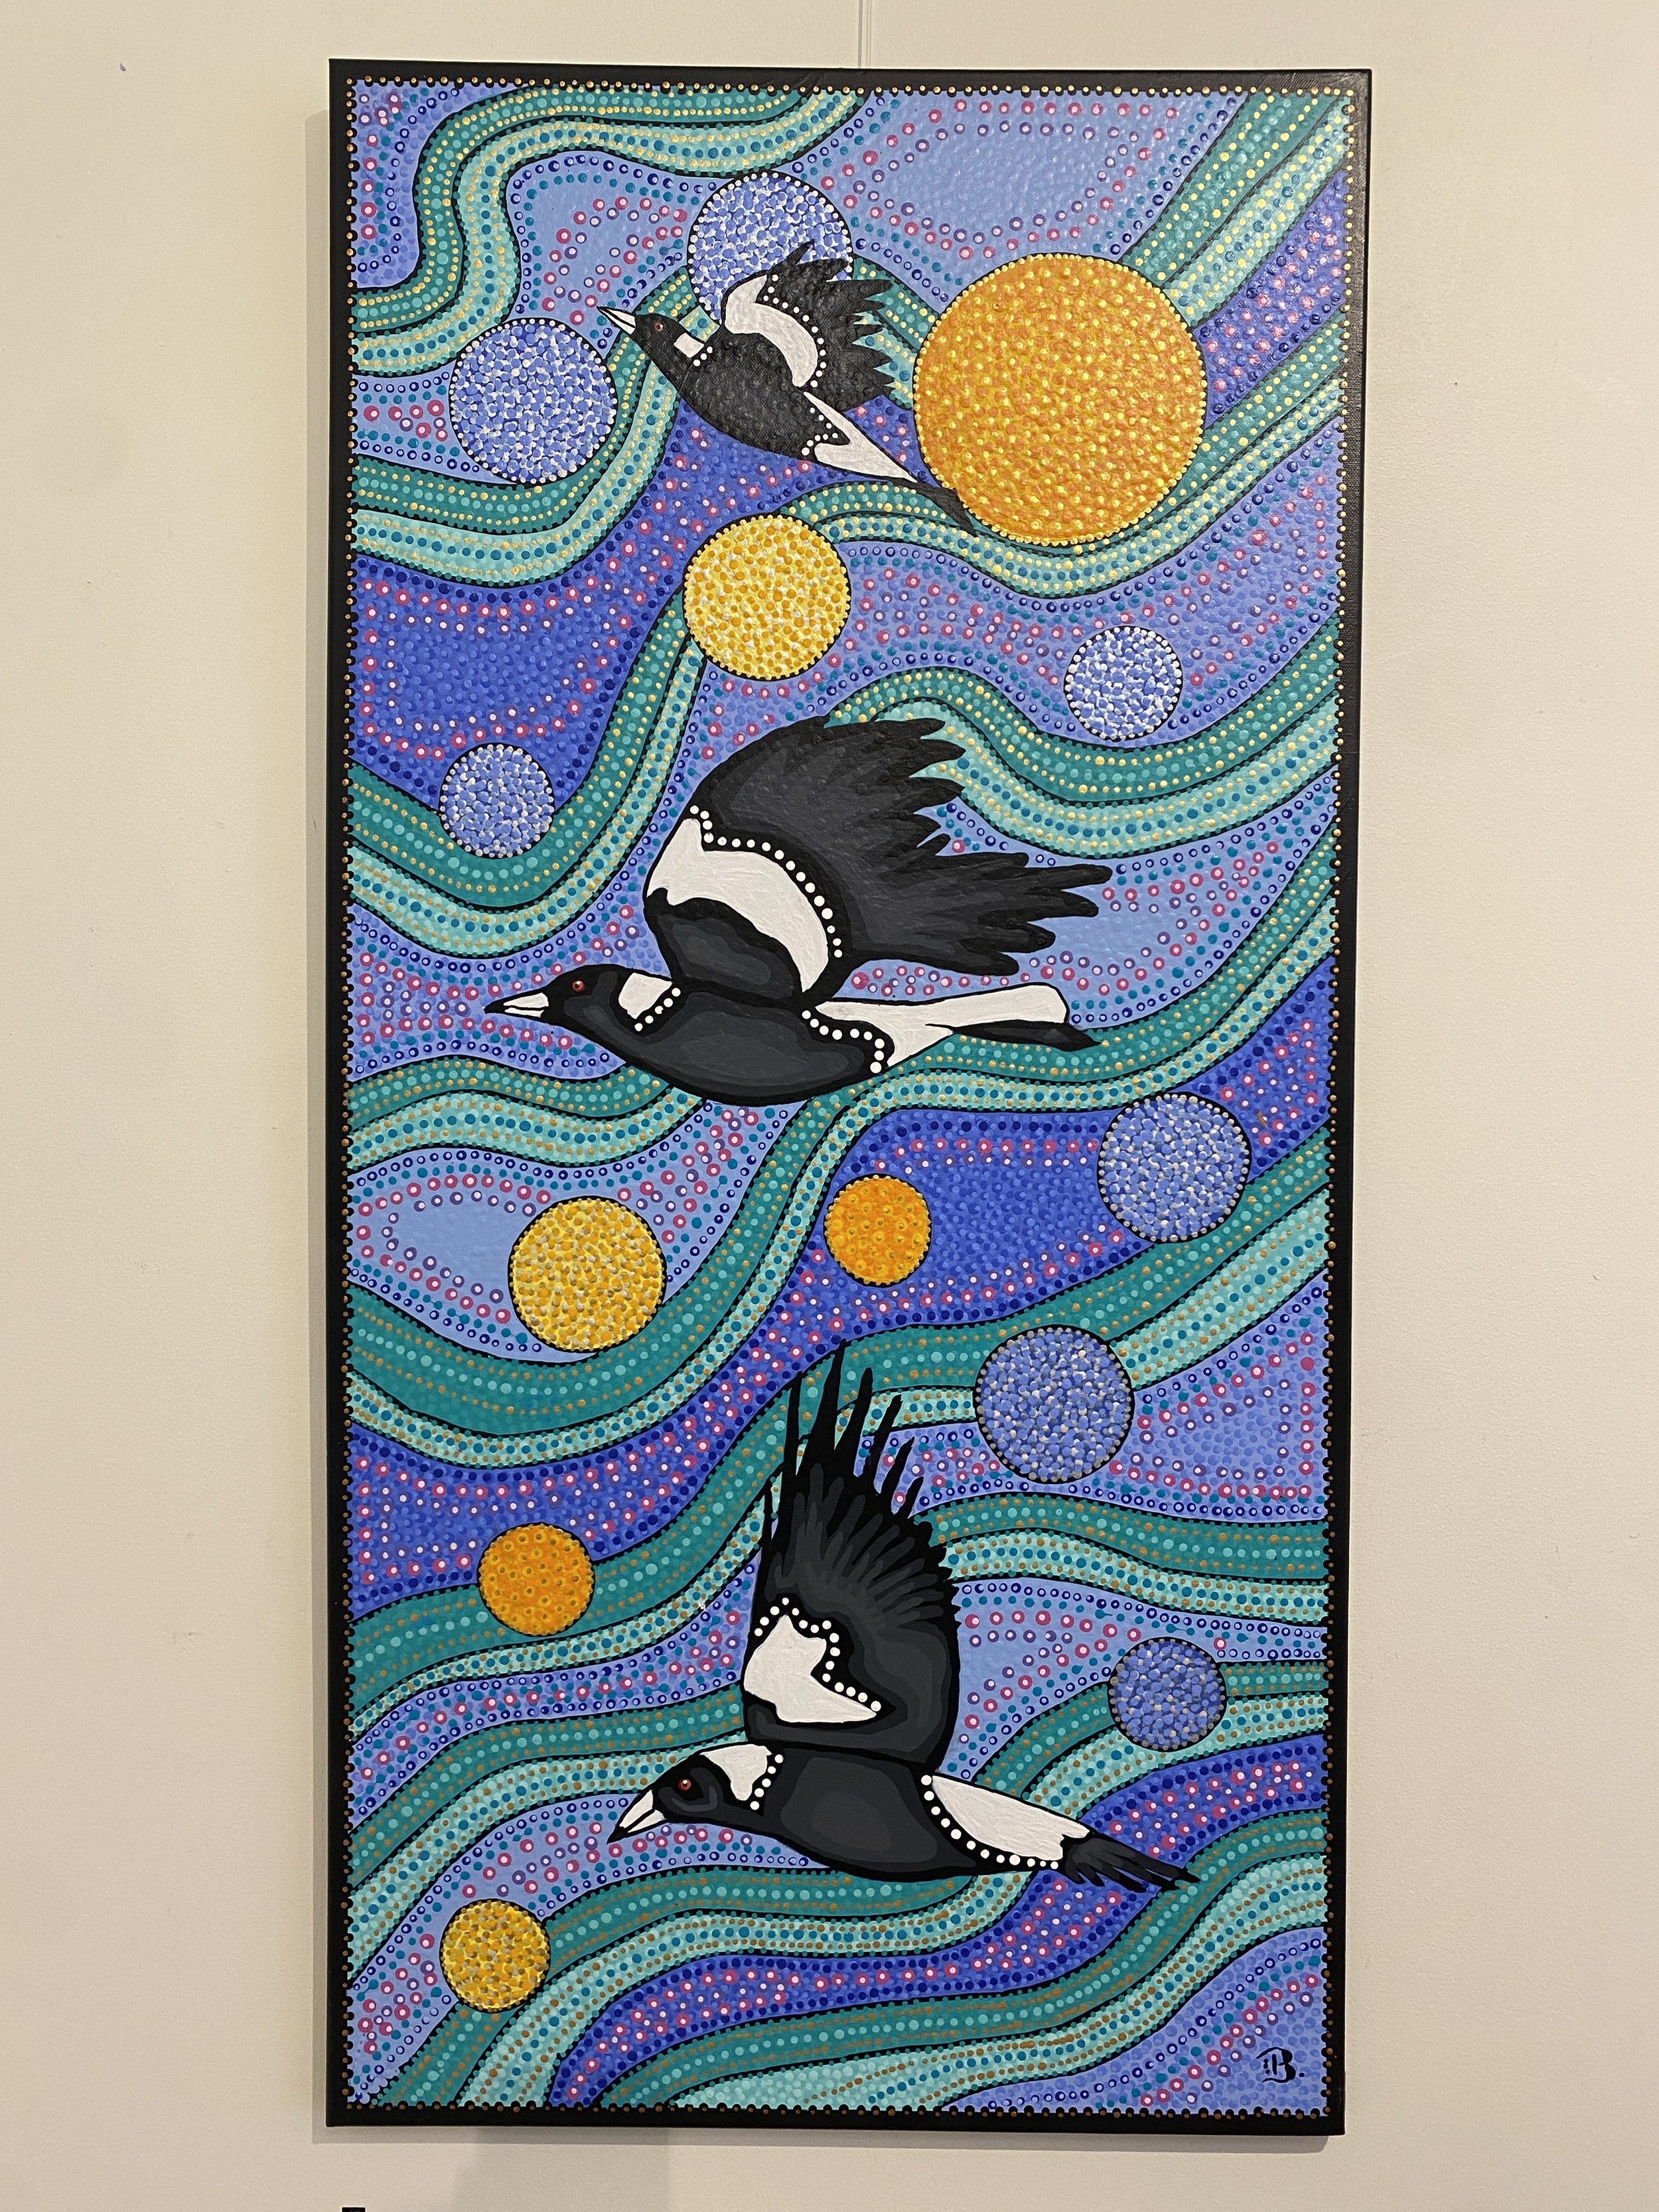 17. Magpies in Heaven | 122x61cm, $495